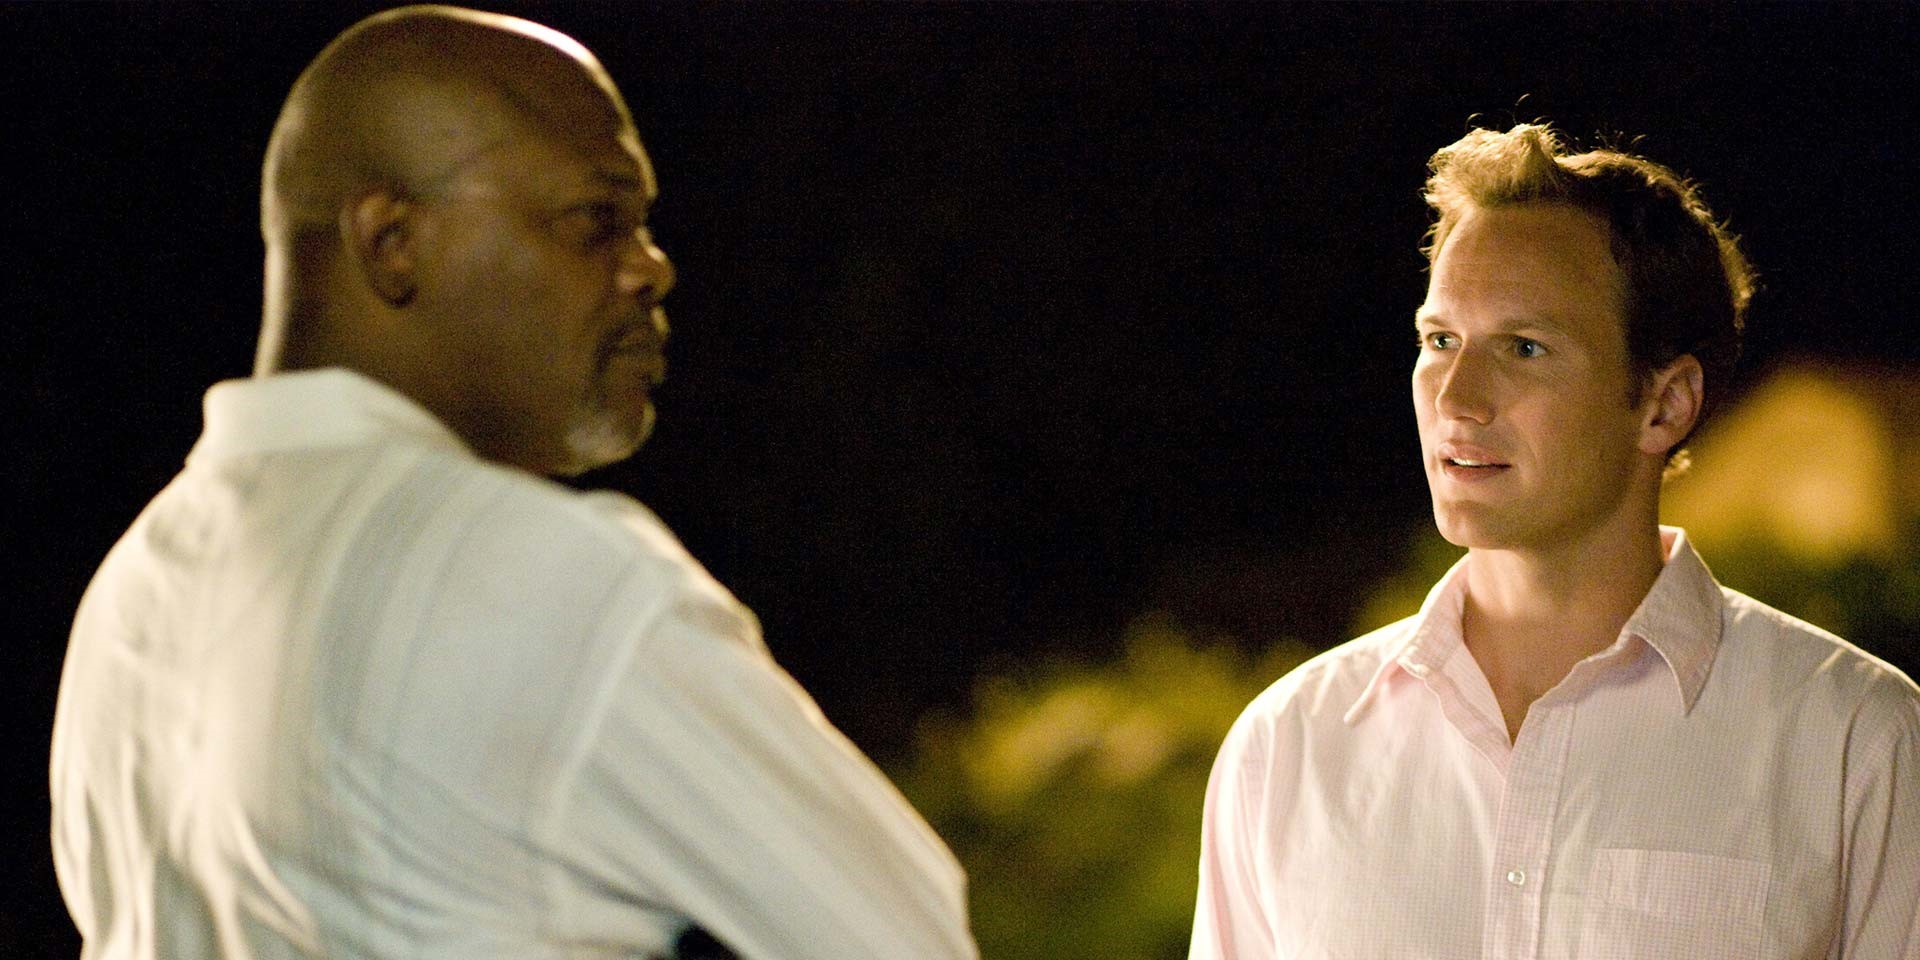 Lakeview Terrace Shooting Locations Explored